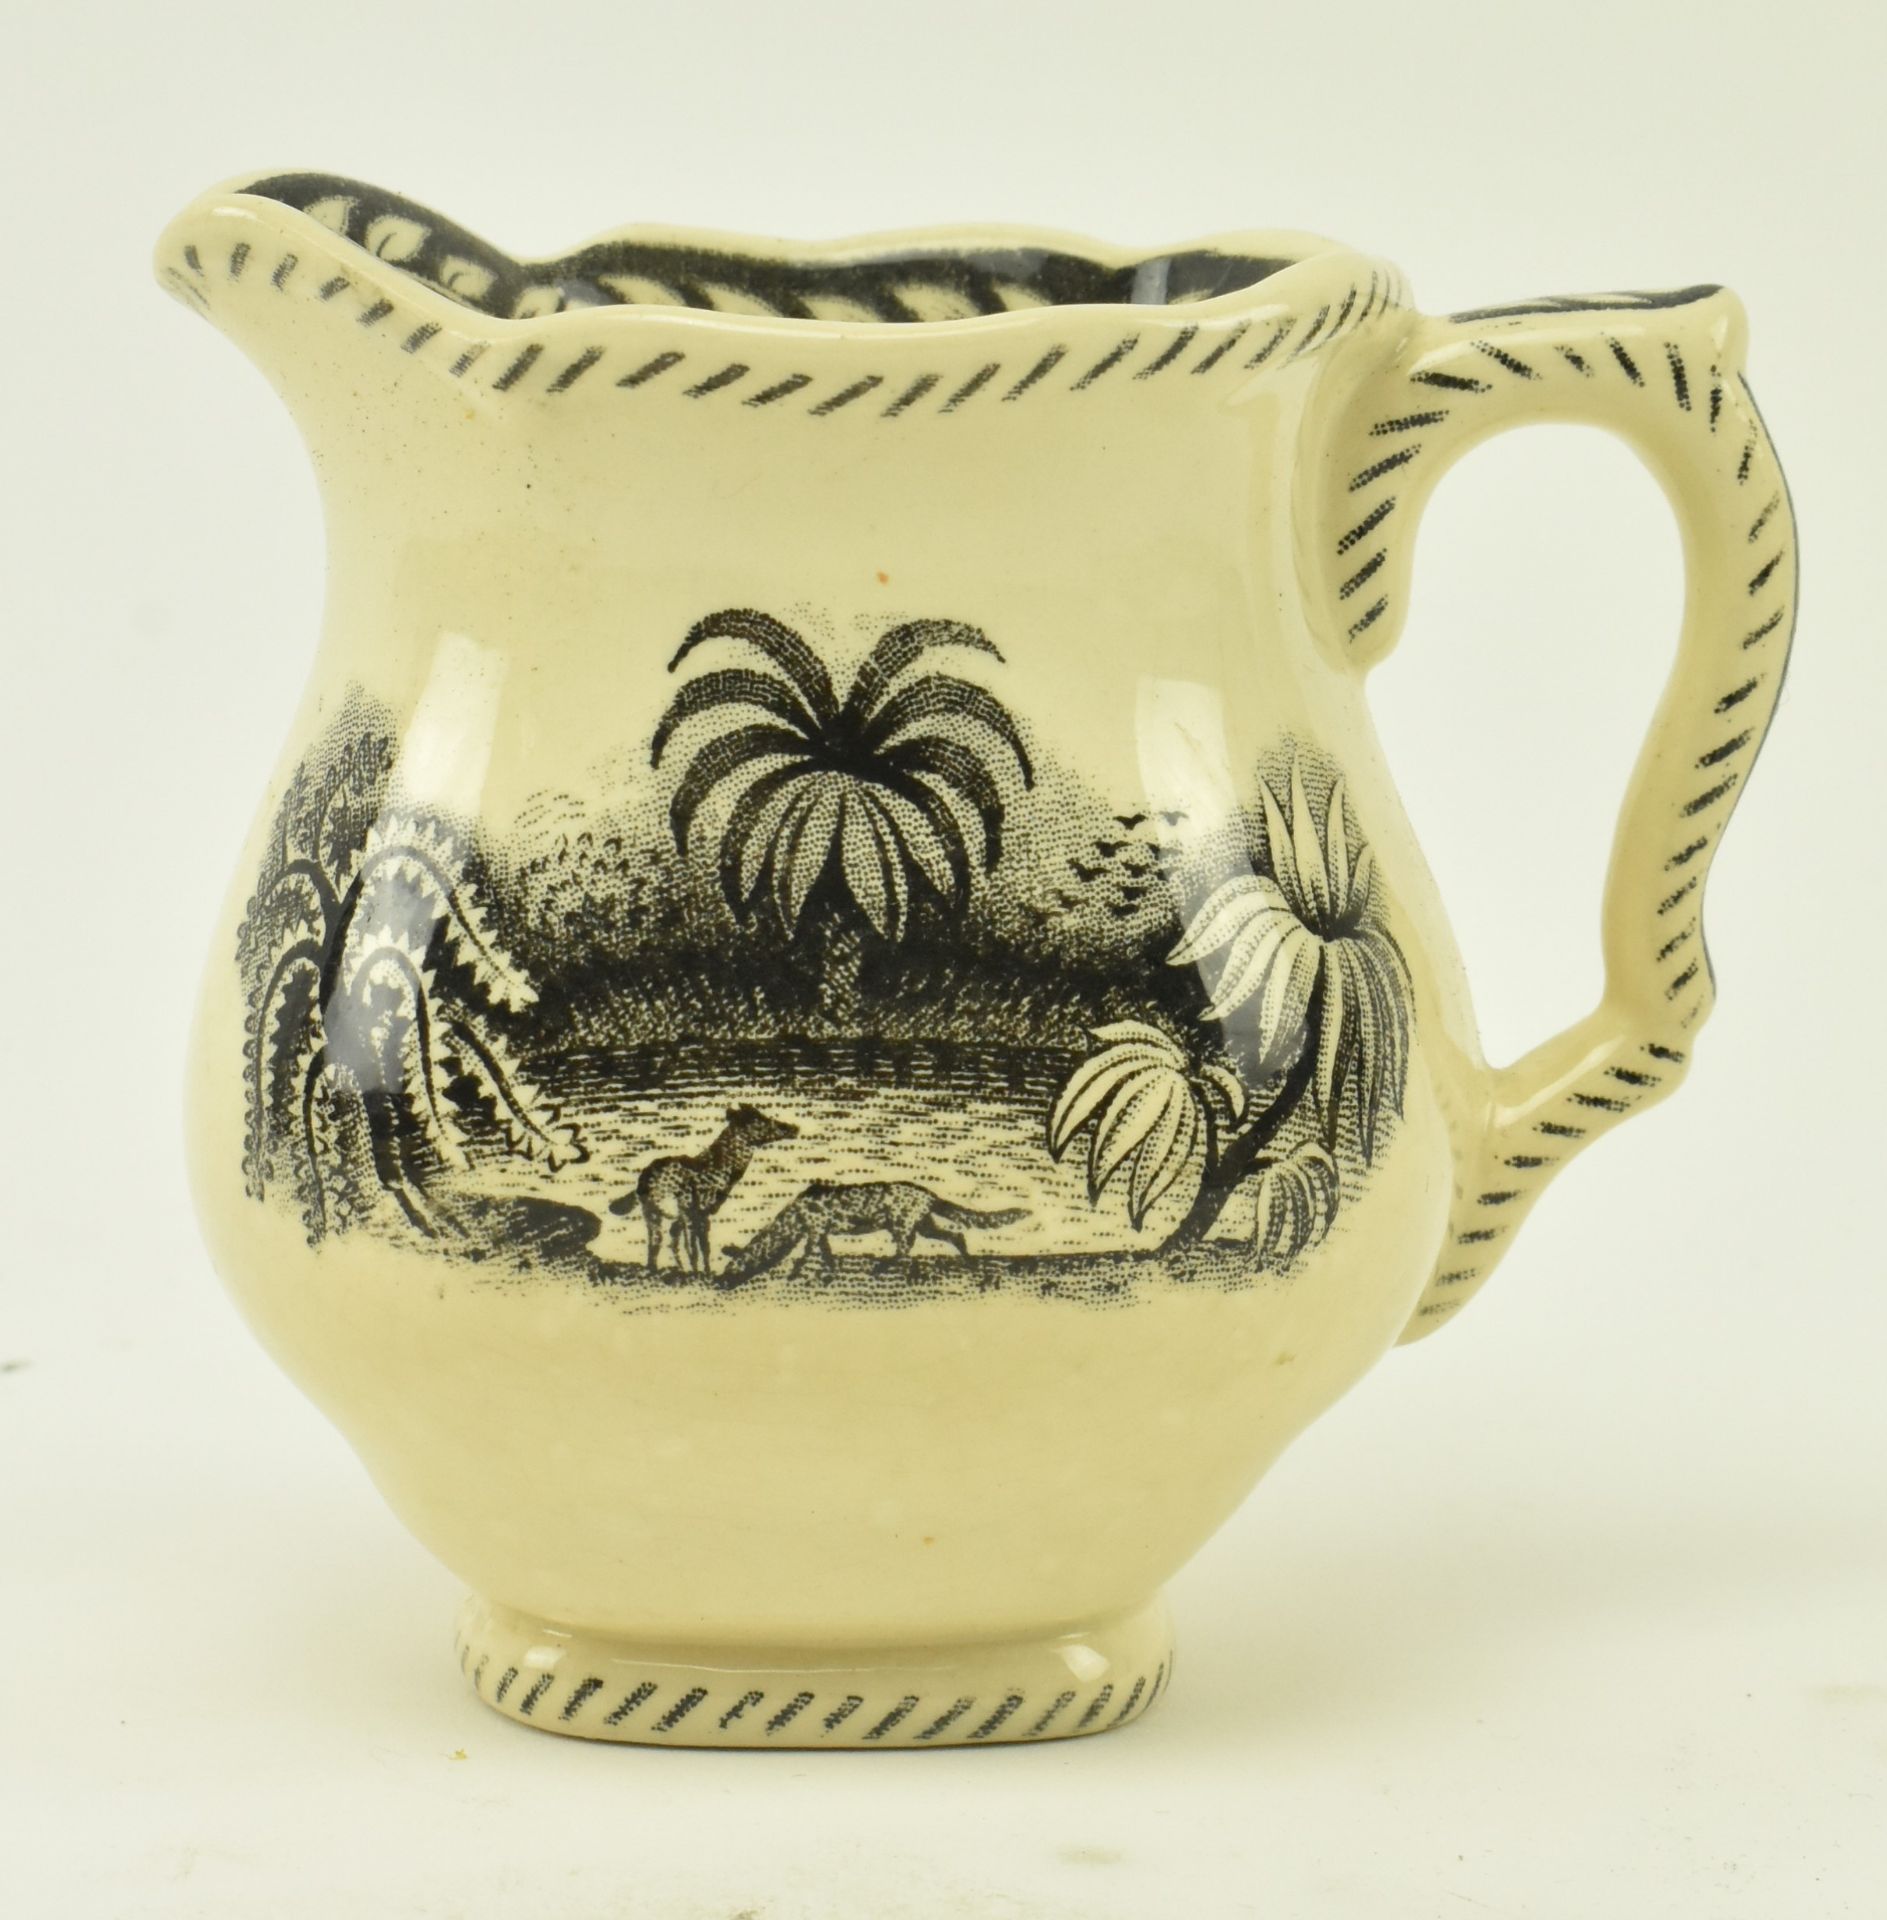 ARTHUR PERCY - EXOTICA - EARLY 20TH CENTURY PART DINNER SERVICE - Image 6 of 13